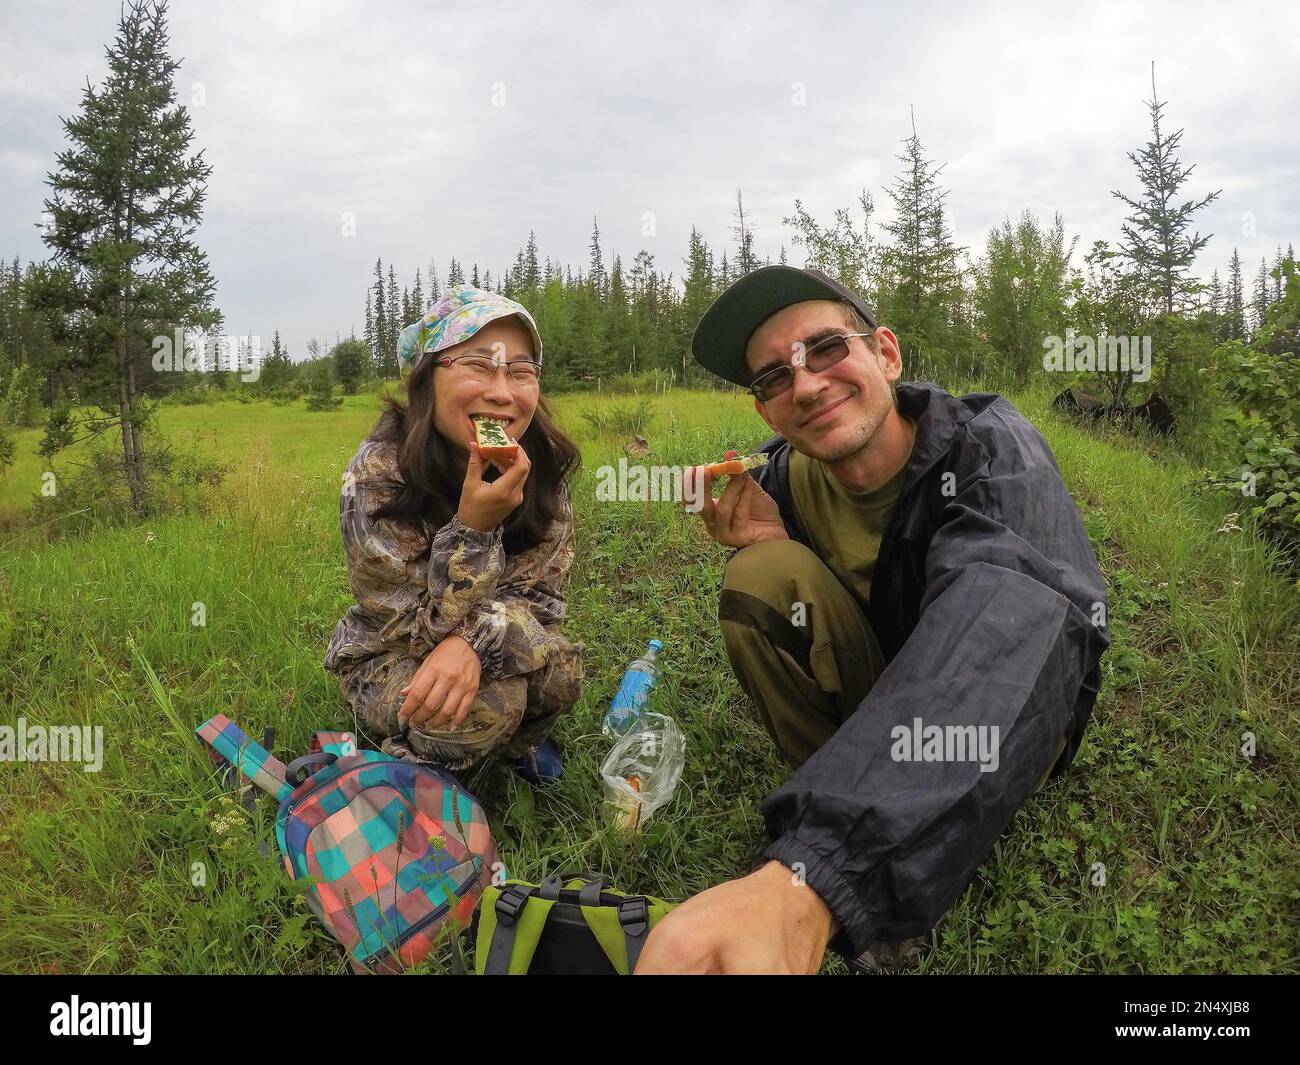 Russian man with glasses making a selfie with a happy Asian girl Yakut for a picnic with sandwiches in the Northern taiga wild forest. Stock Photo